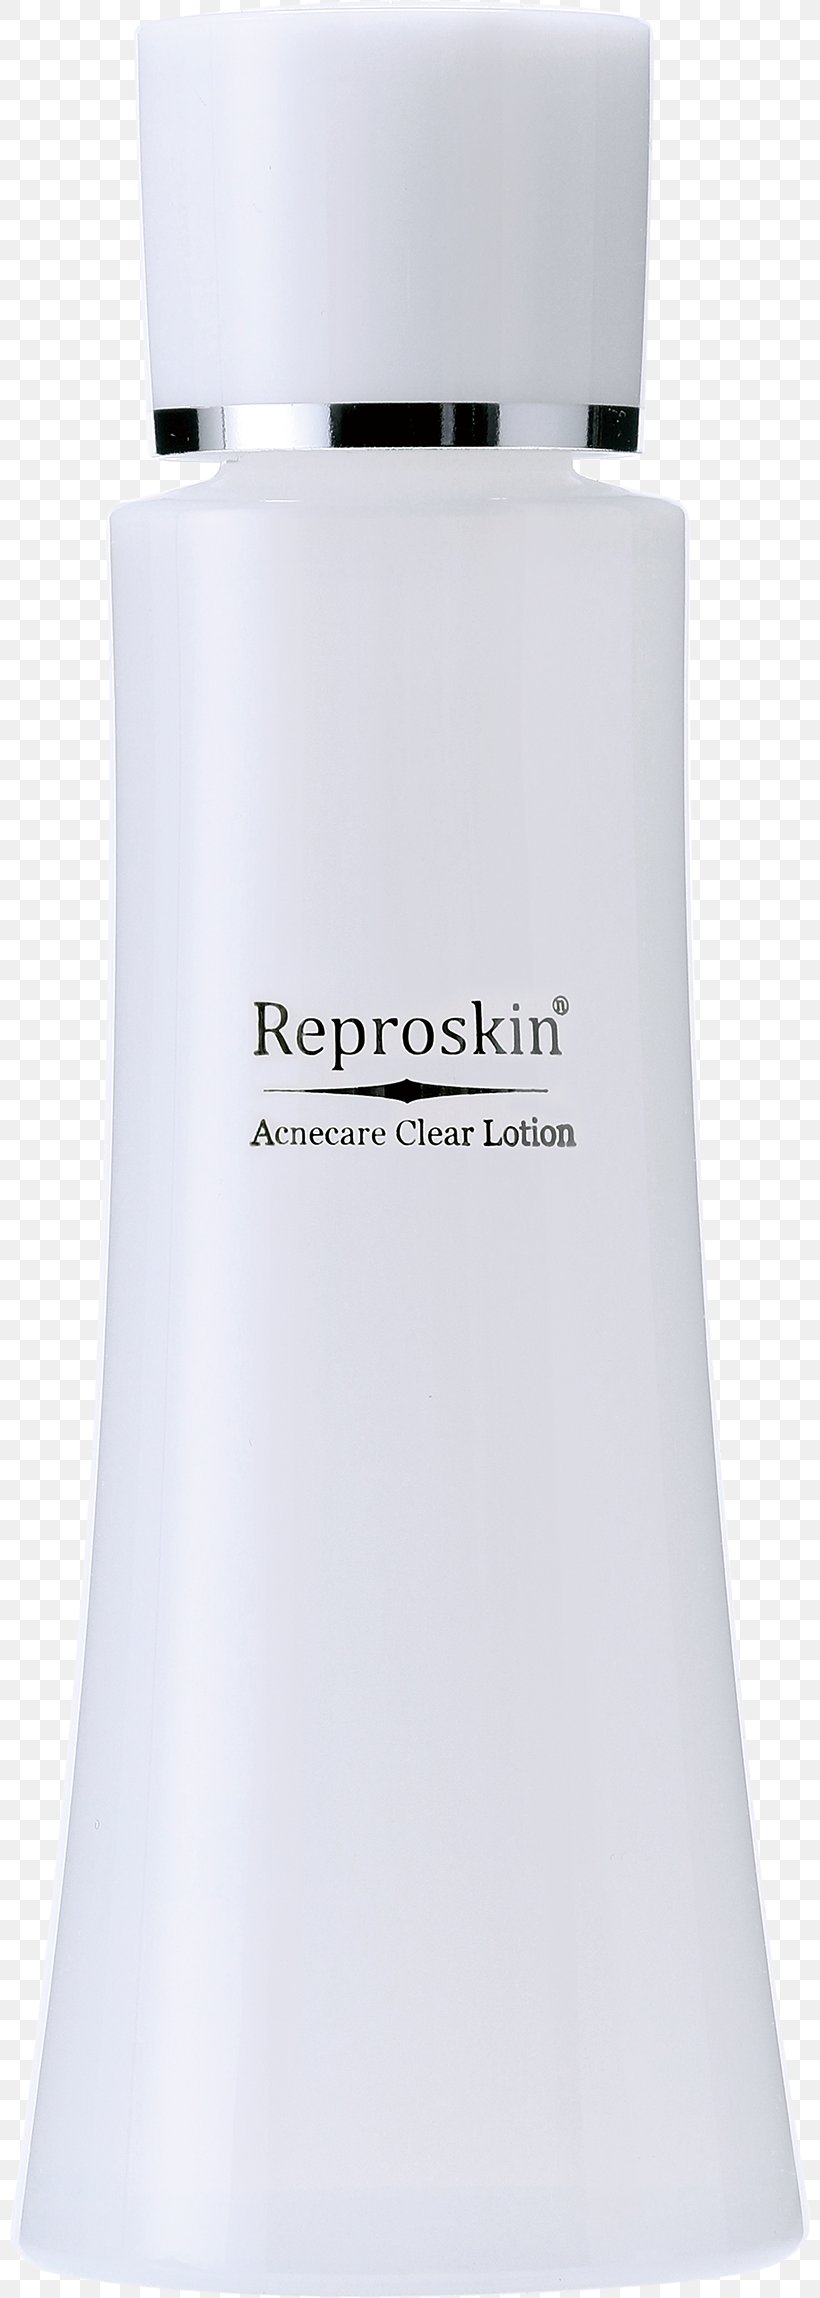 Lotion Perfume, PNG, 802x2298px, Lotion, Perfume, Skin Care Download Free